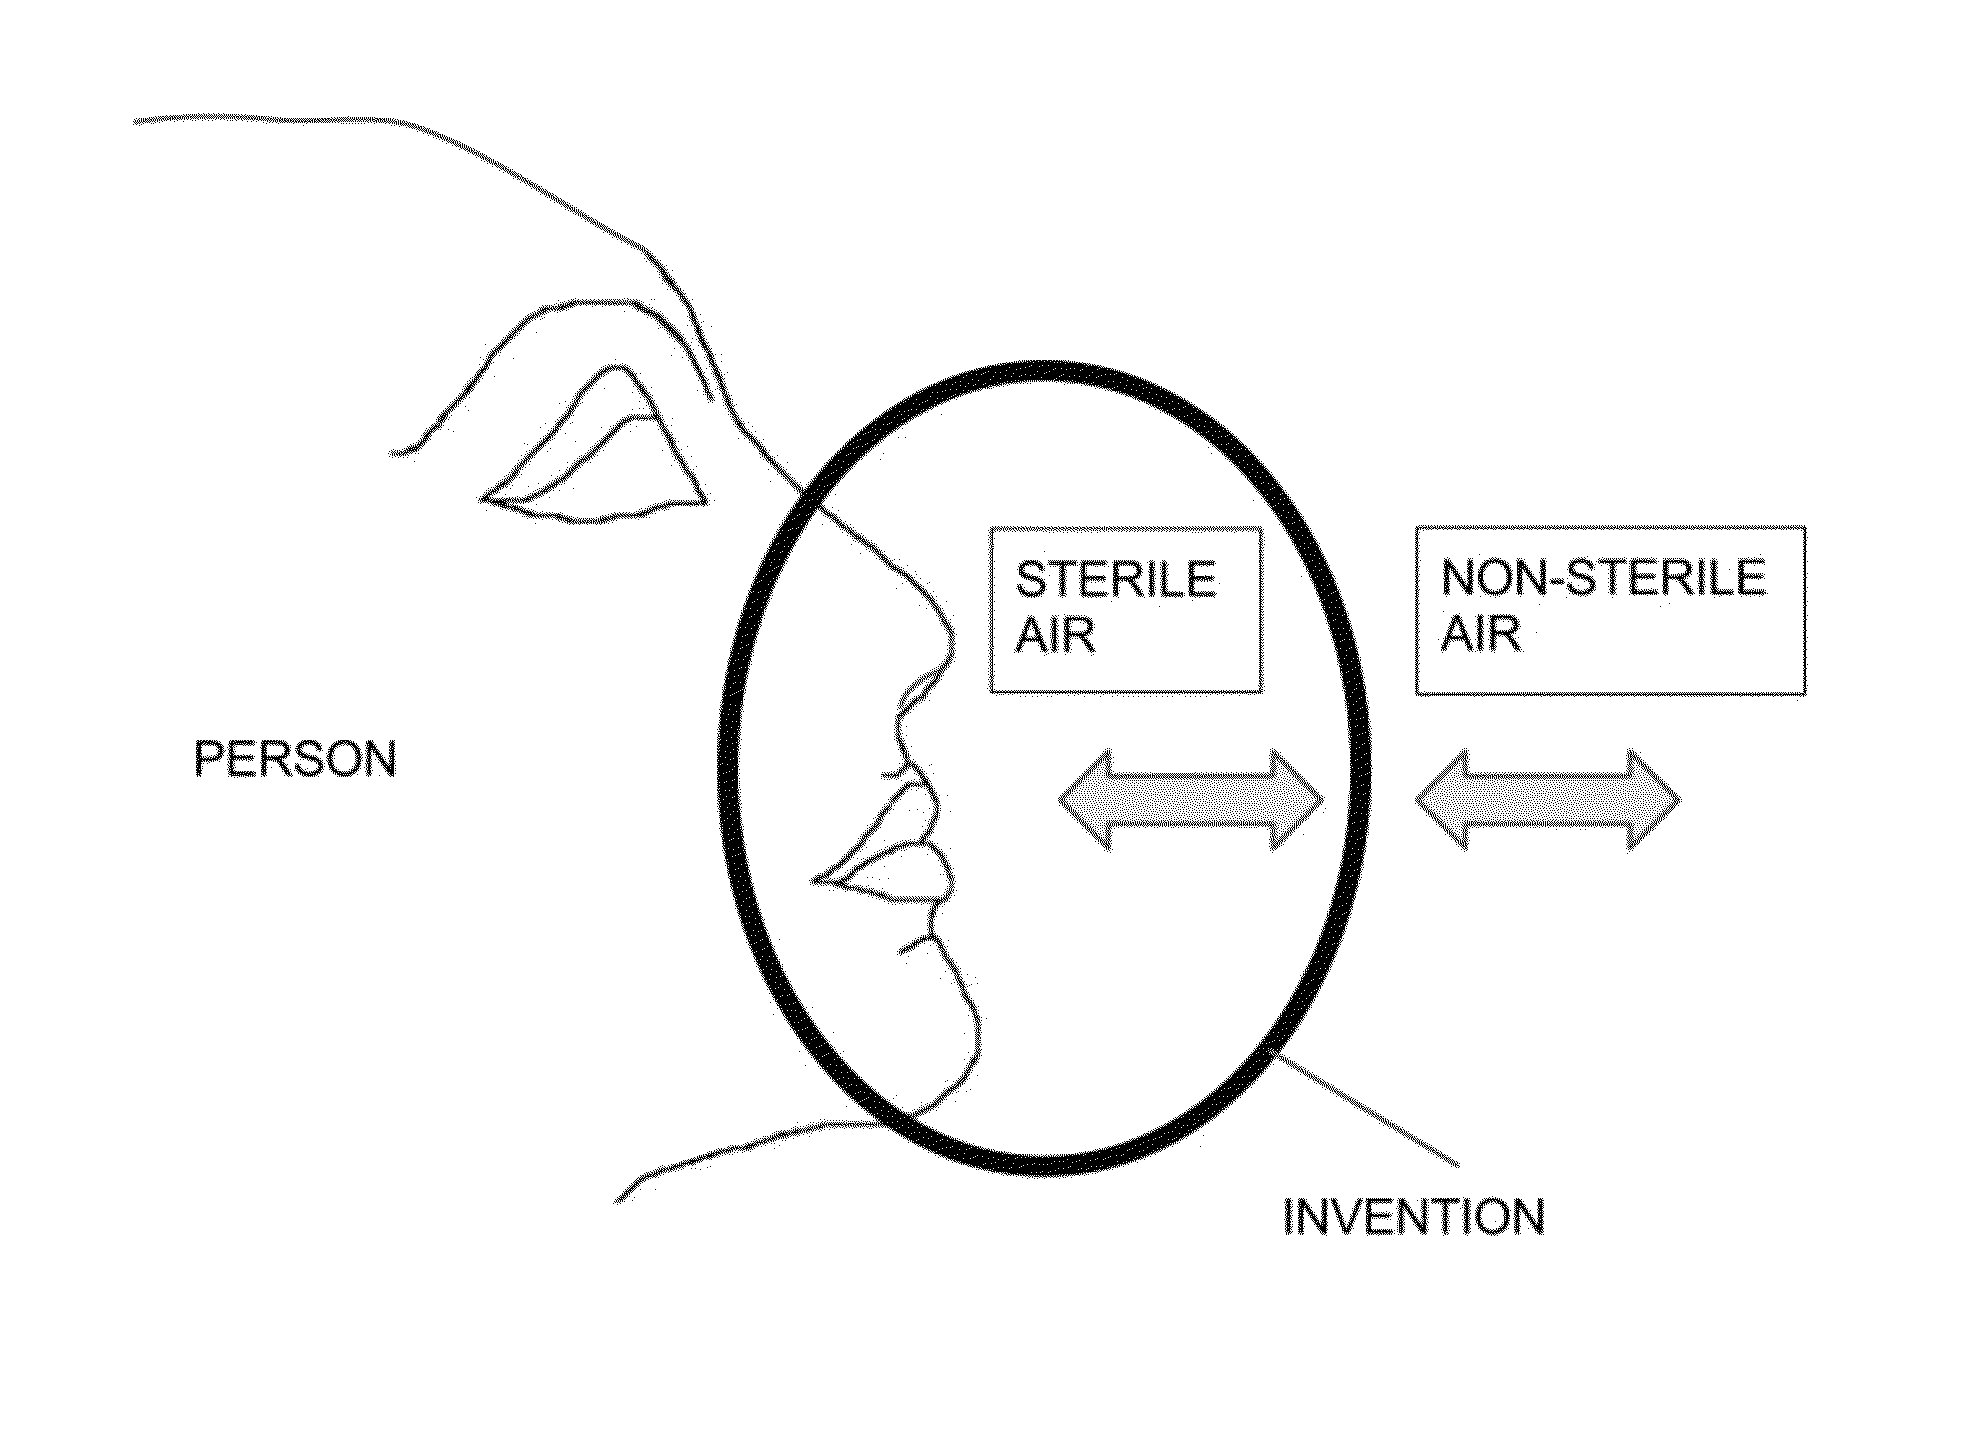 Apparatus for infection control